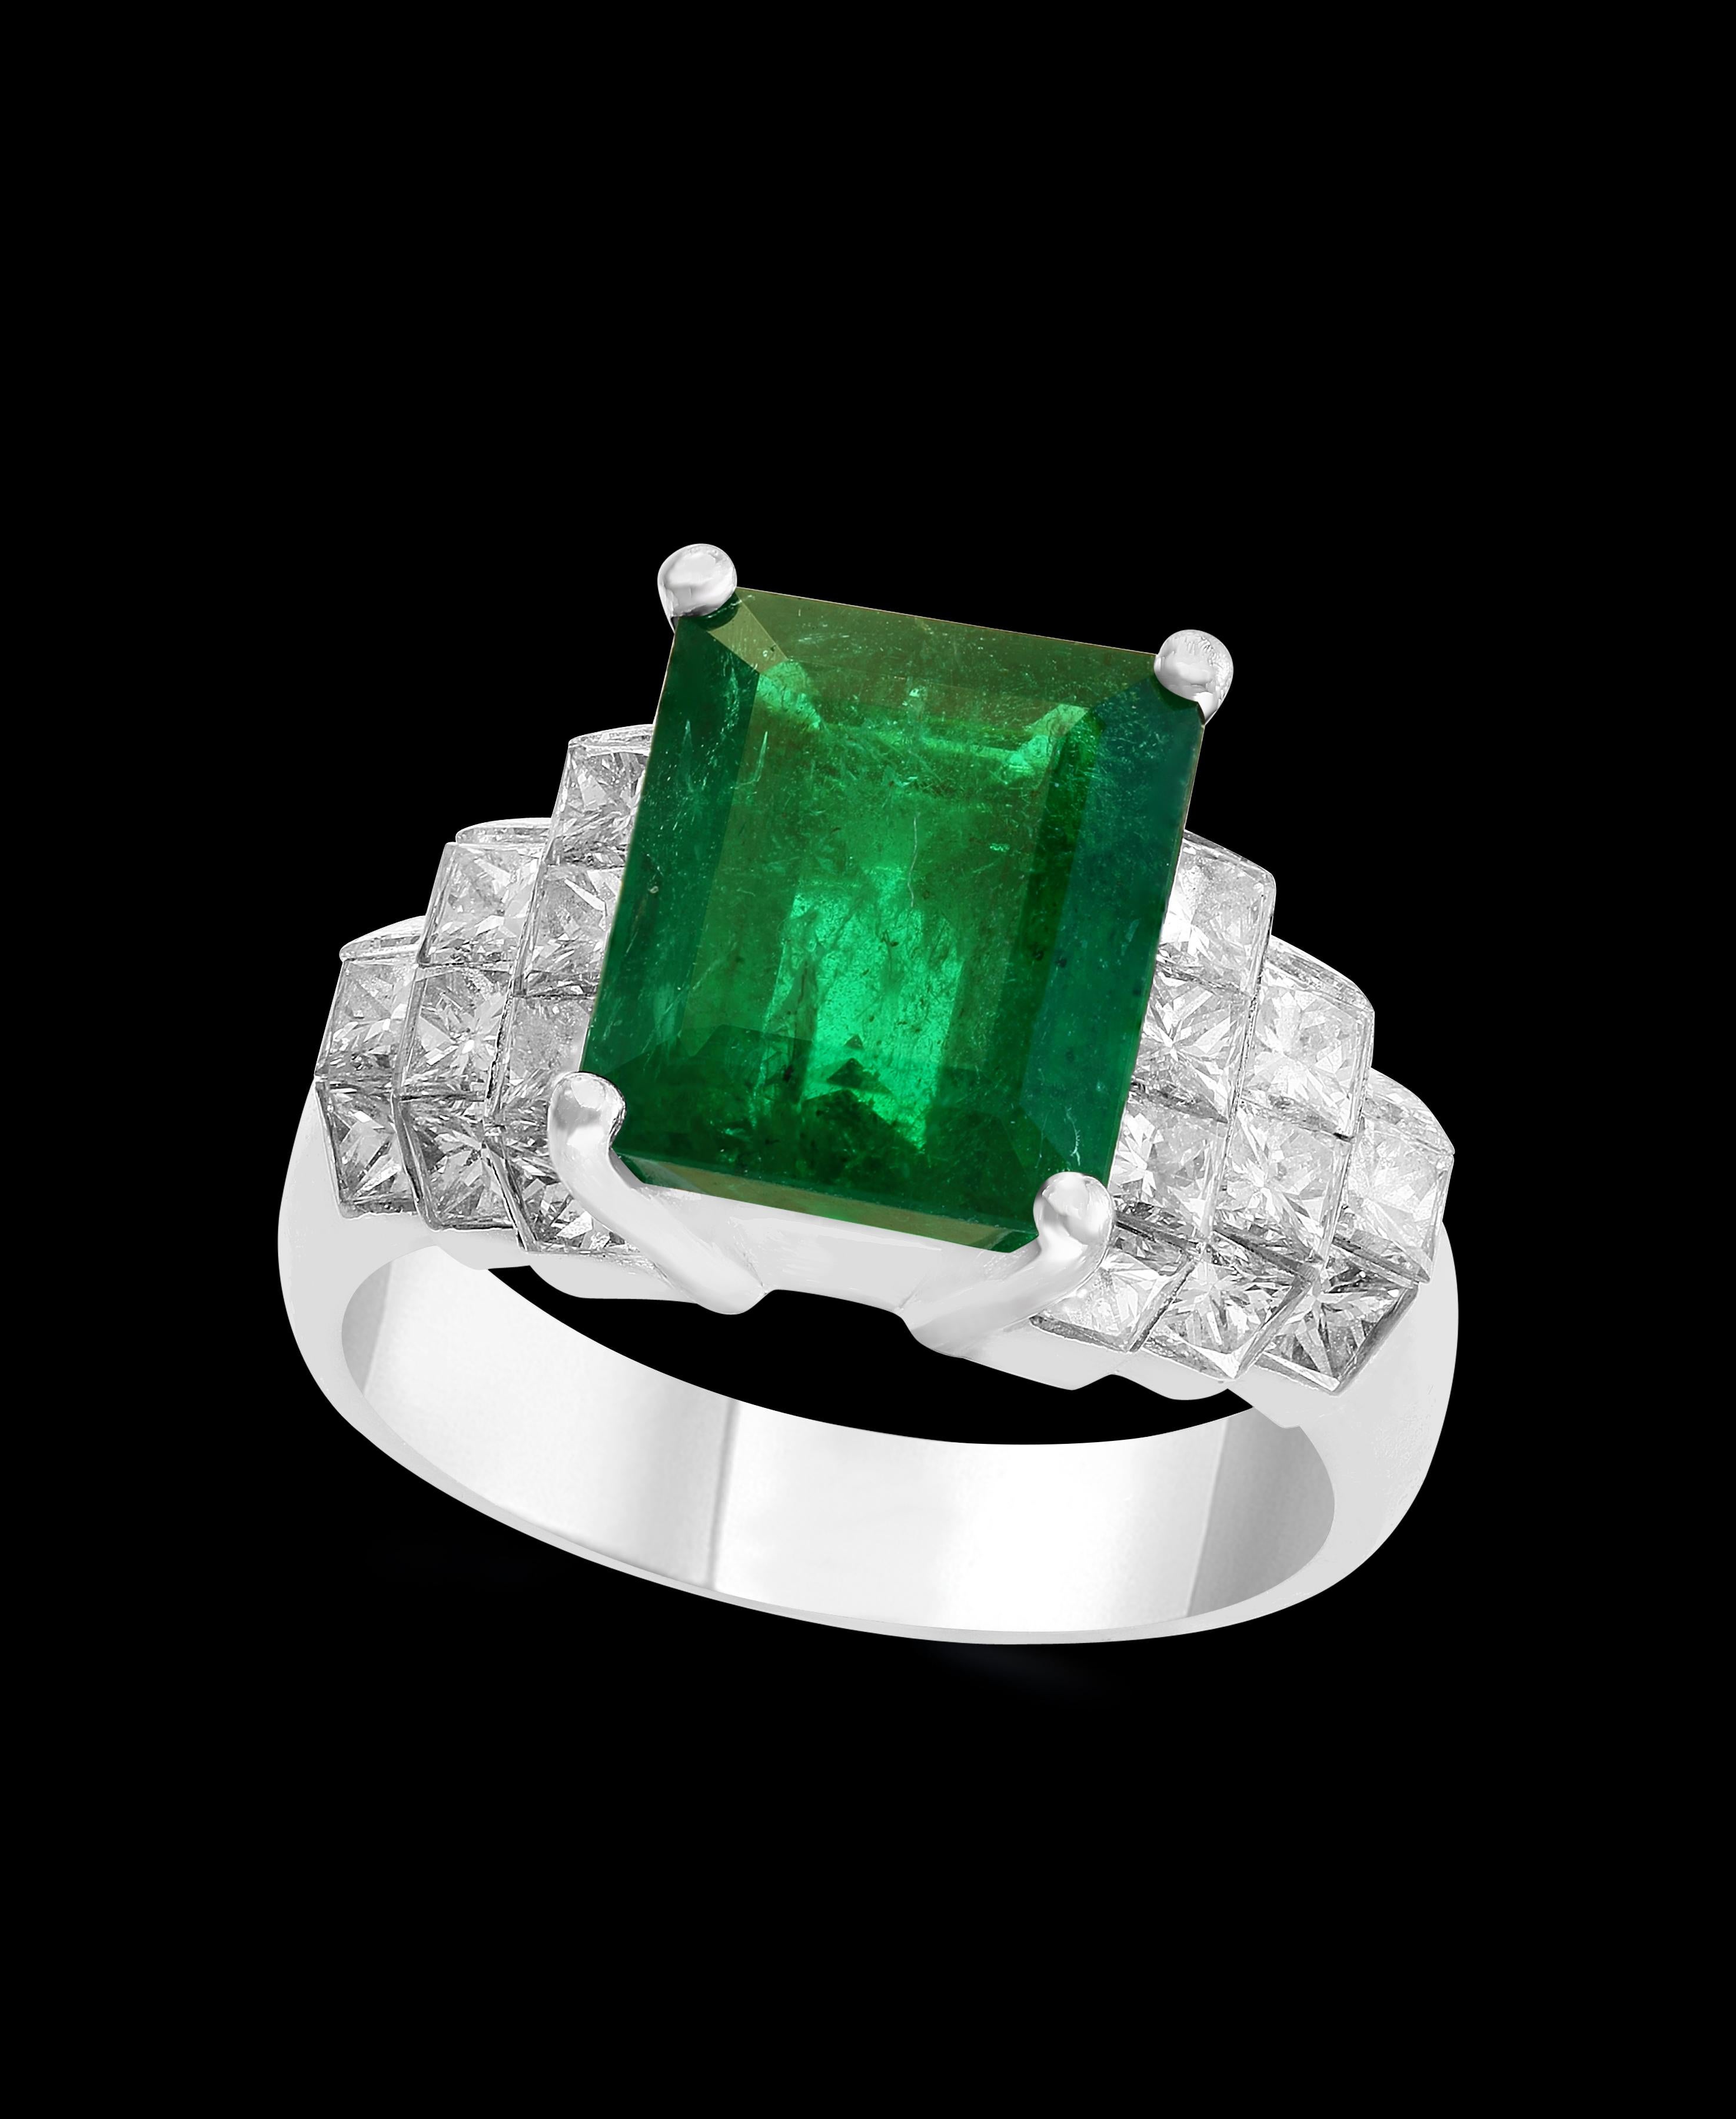 A classic, Cocktail ring 
5 Carat   Emerald and Diamond Ring, Estate.
Platinum 11.39 gm
 Diamonds: approximate 1.75 Carat 
Emerald: 5.0 ct
Color: Deep  Green, Transparent extreme Fine Color Quality
One of our finest Colombian Emerald ring.
Cut: